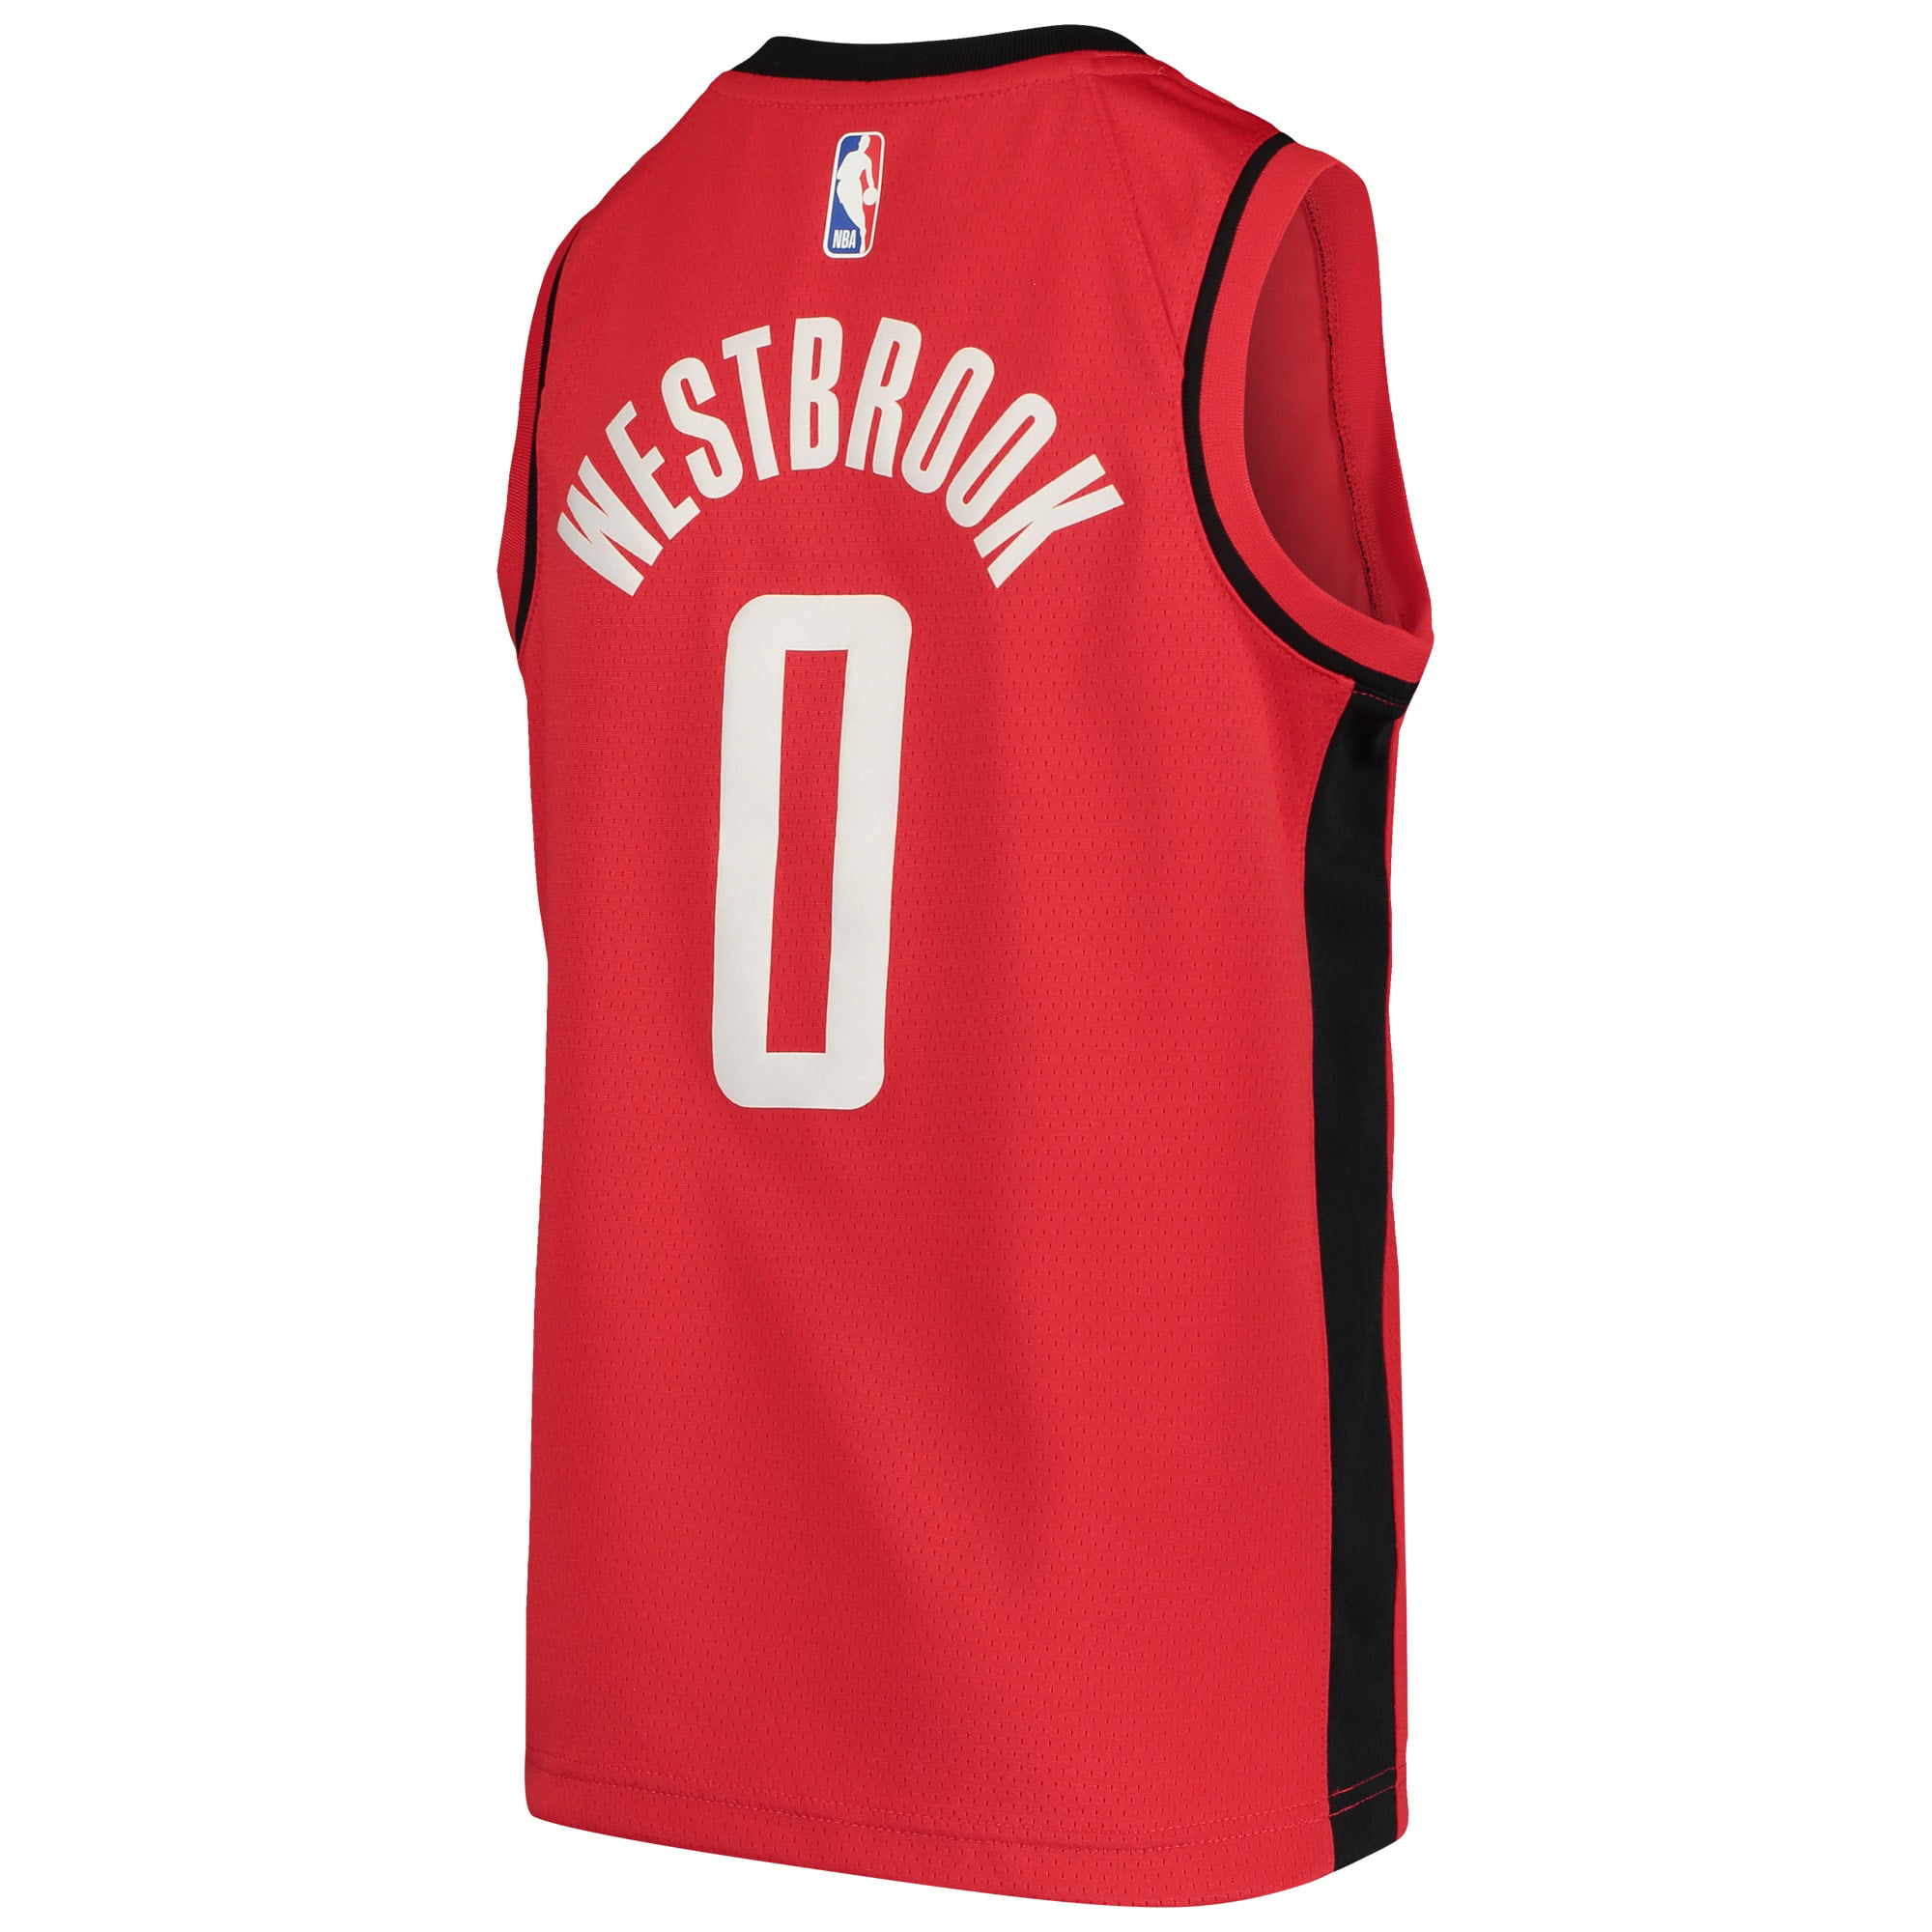 Russell Westbrook Houston Rockets Nike Youth Name & Number